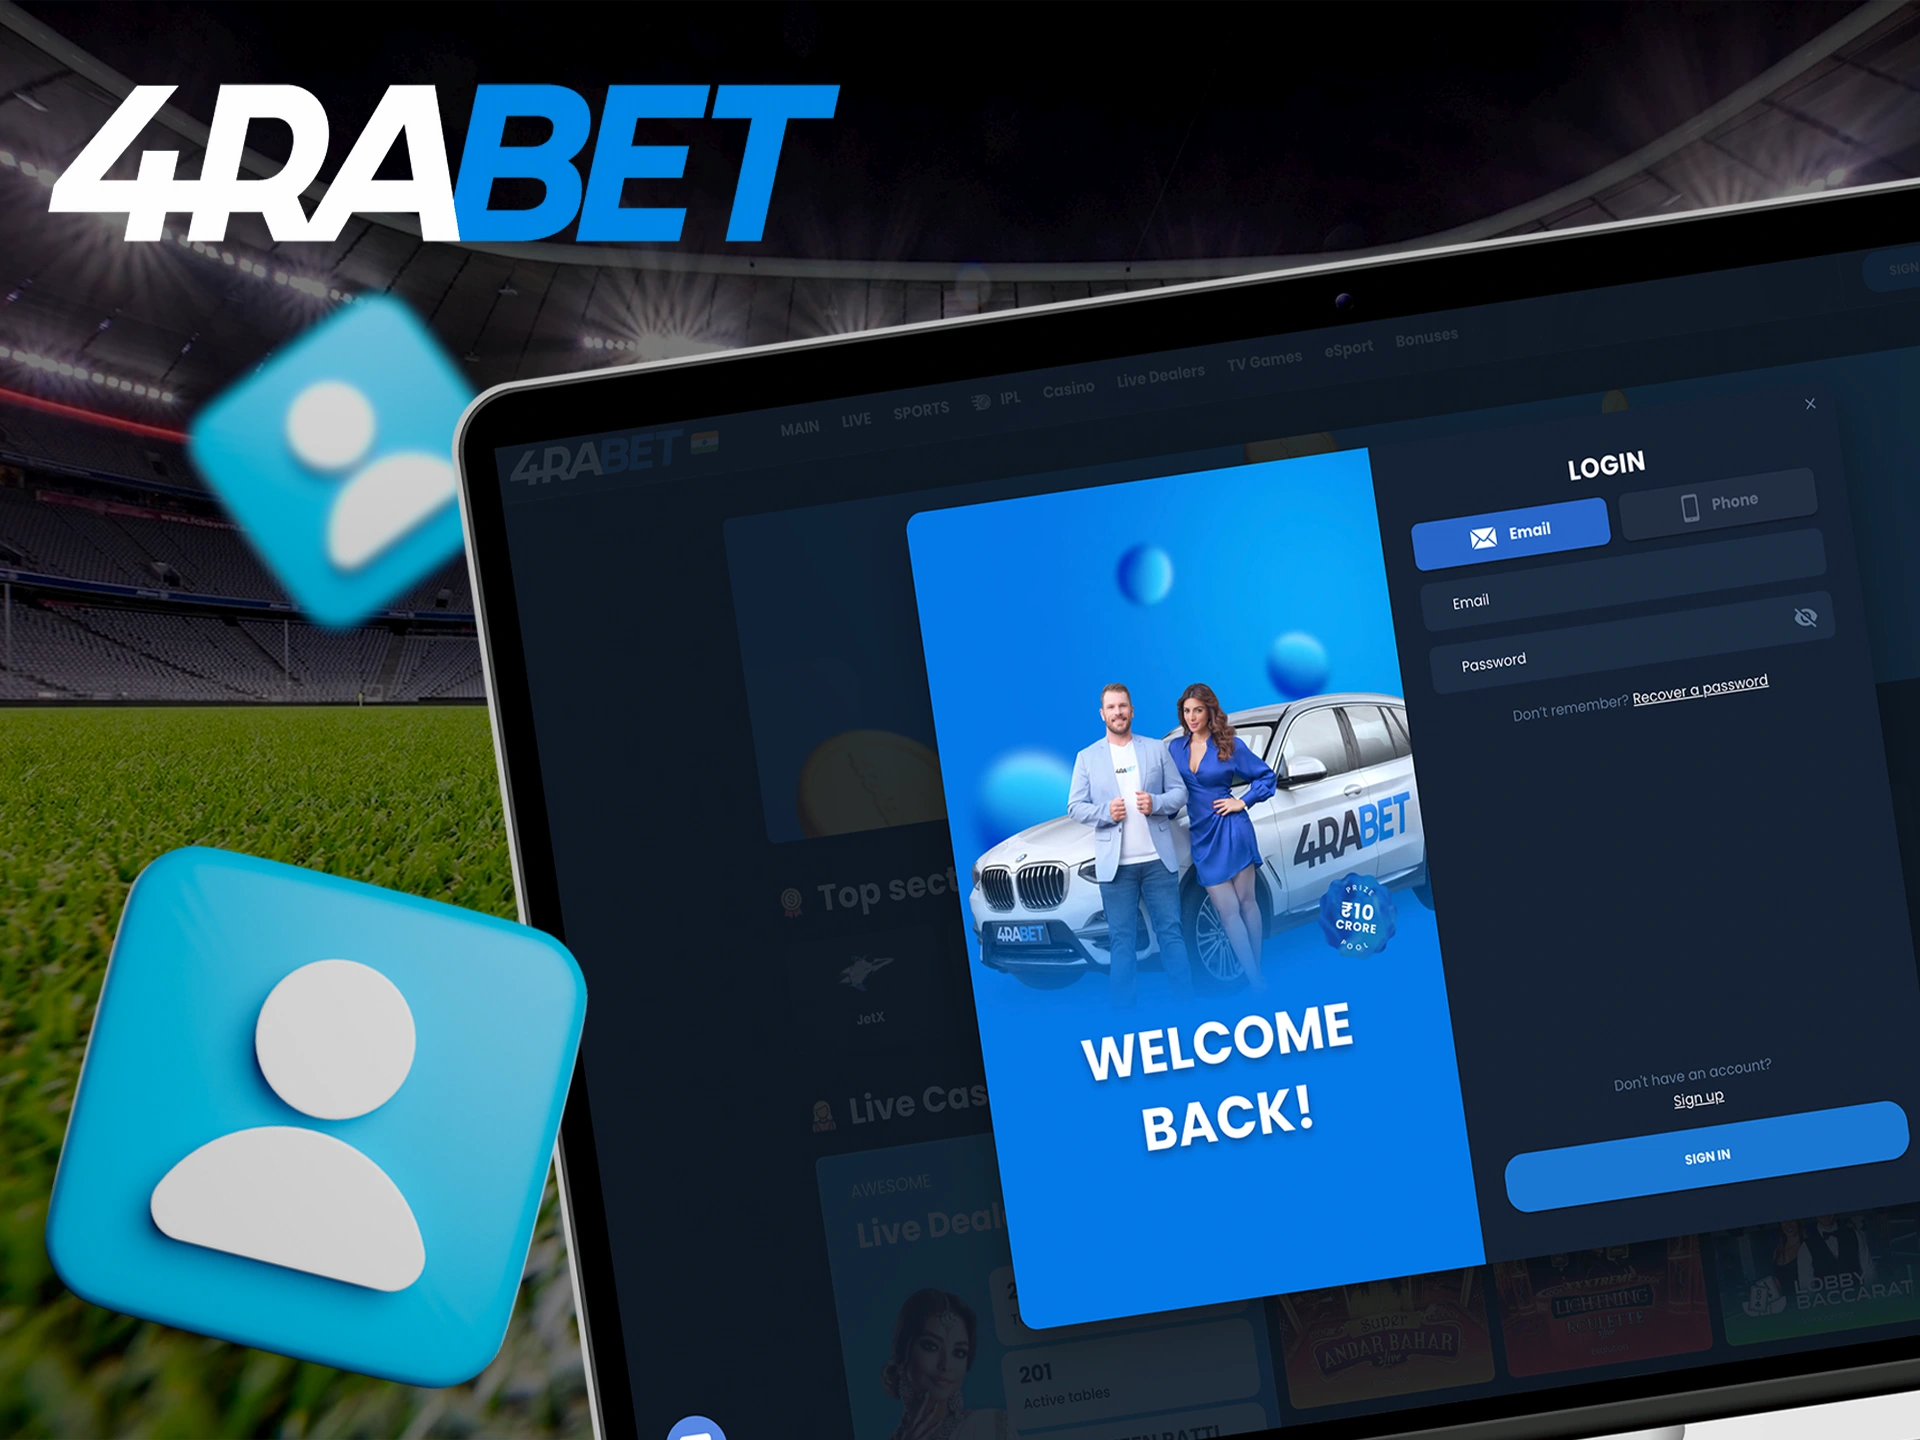 Log in to your existing account on the 4Rabet betting site, if you have previously registered on the platform.